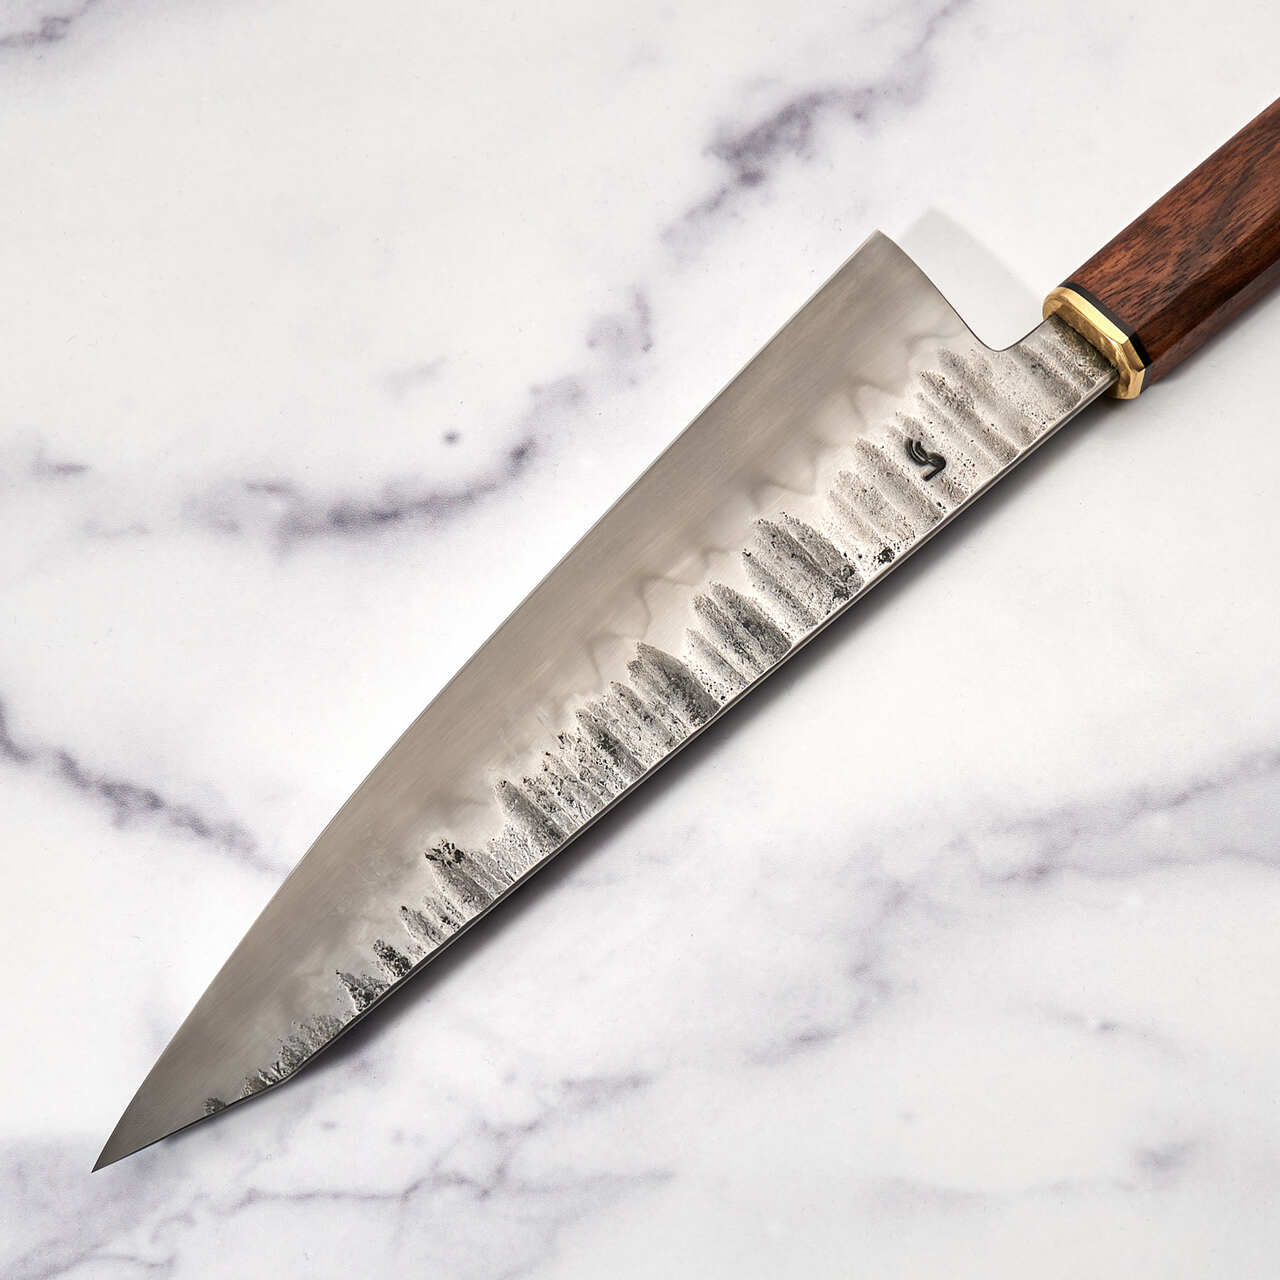 MCX K-Tip Gyuto 230mm 26c3 Limited Release by Fredrik Spåre - 2nd Edition - Profile